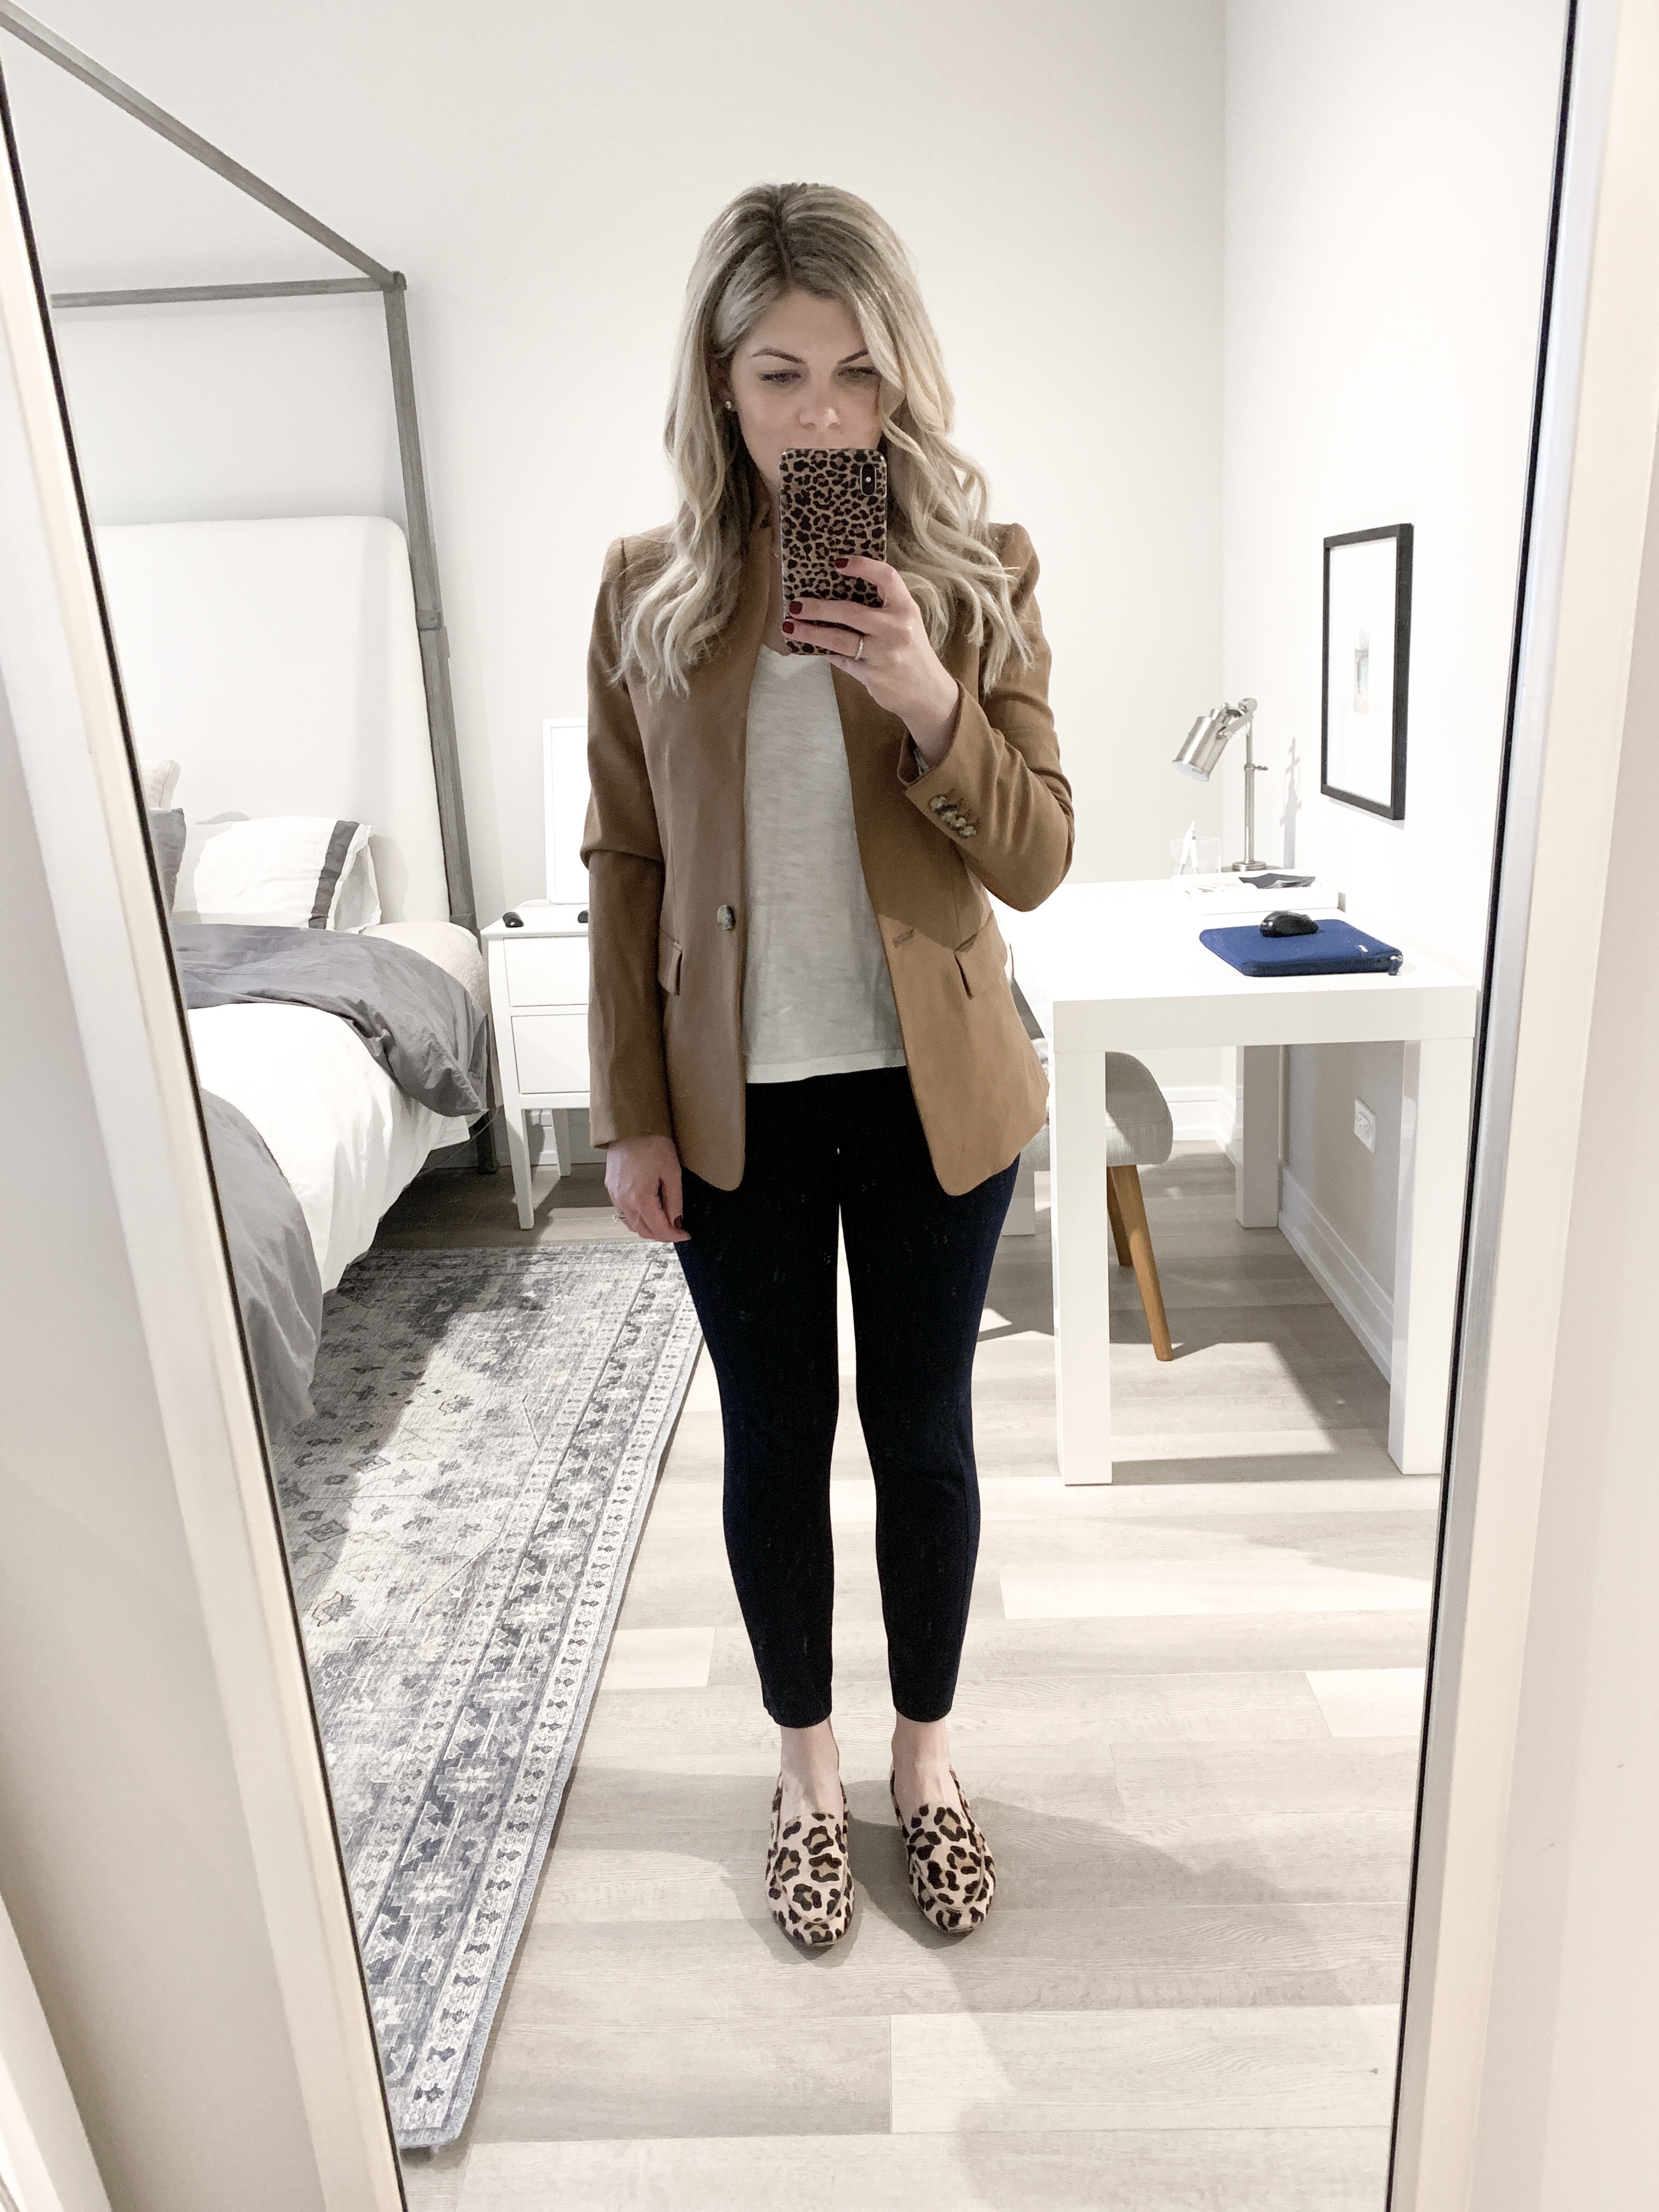 Work Outfits Ideas to Wear This Fall - Cashmere & Jeans